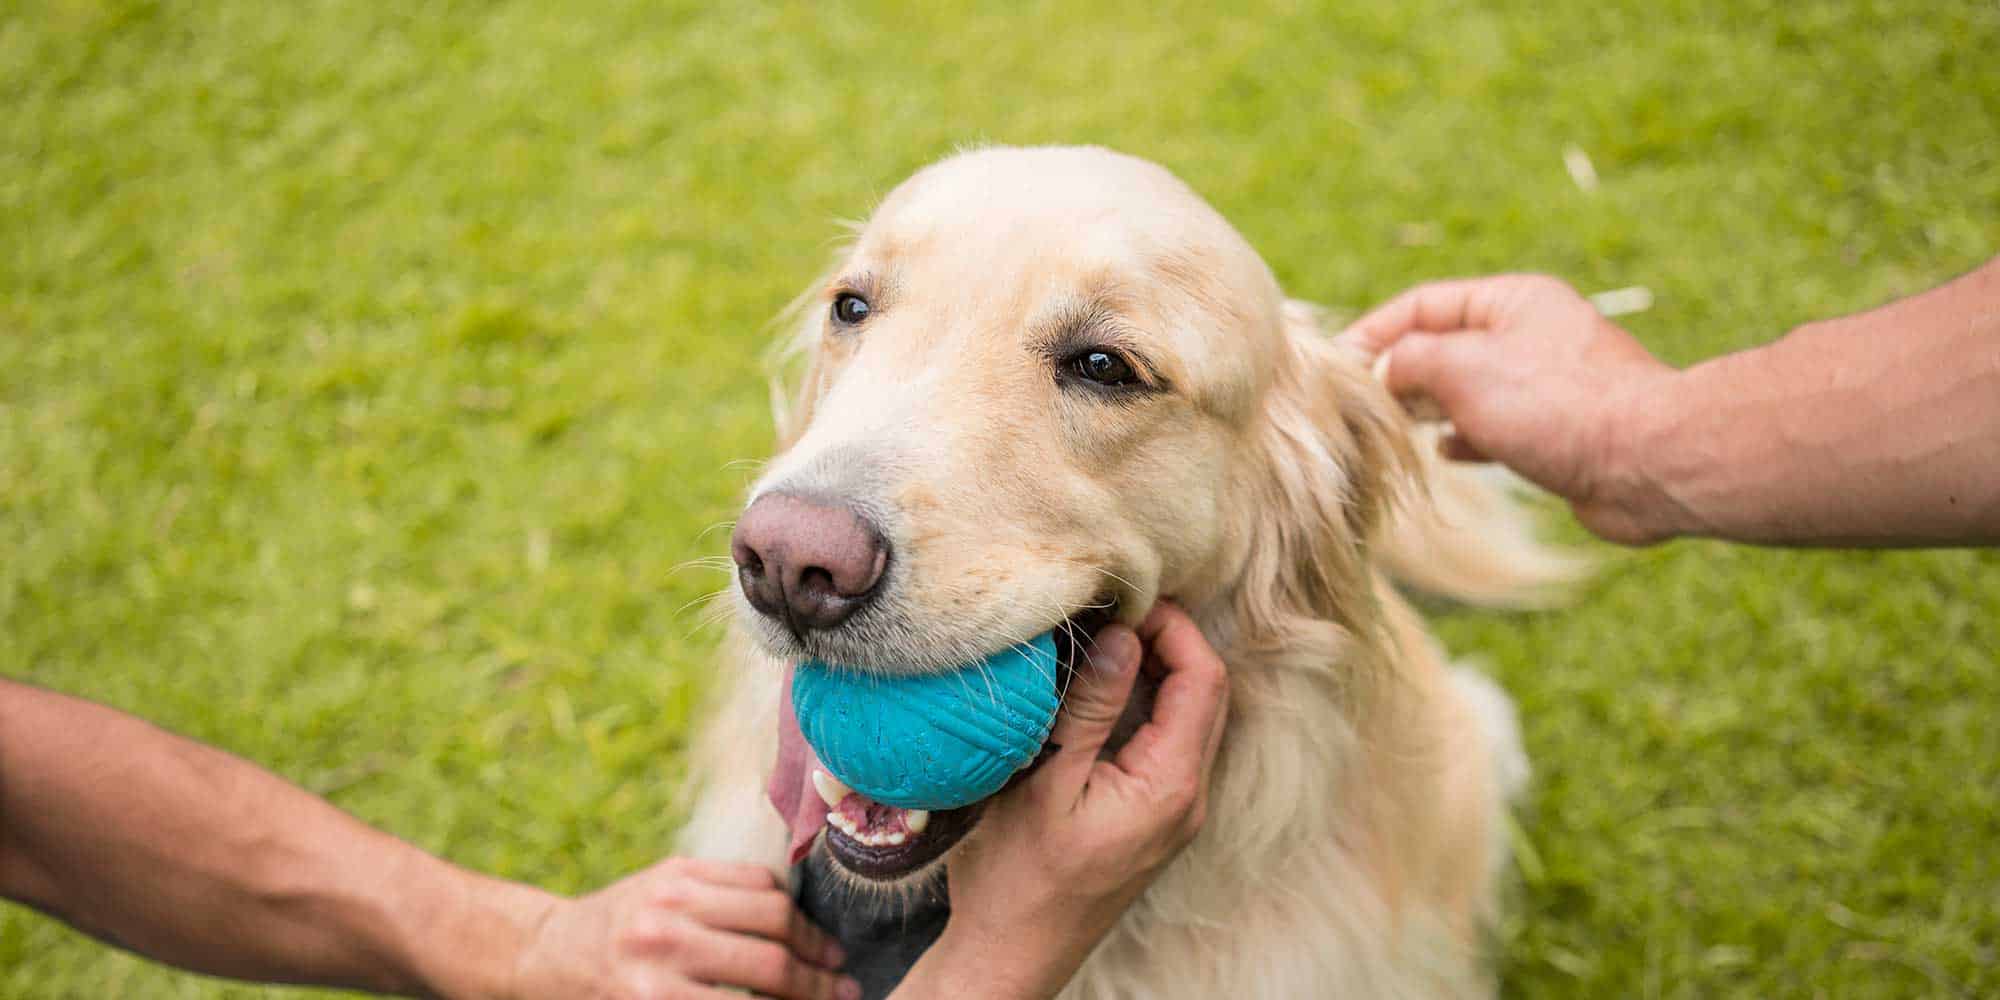 A golden retriever out with their humans playing with a ball